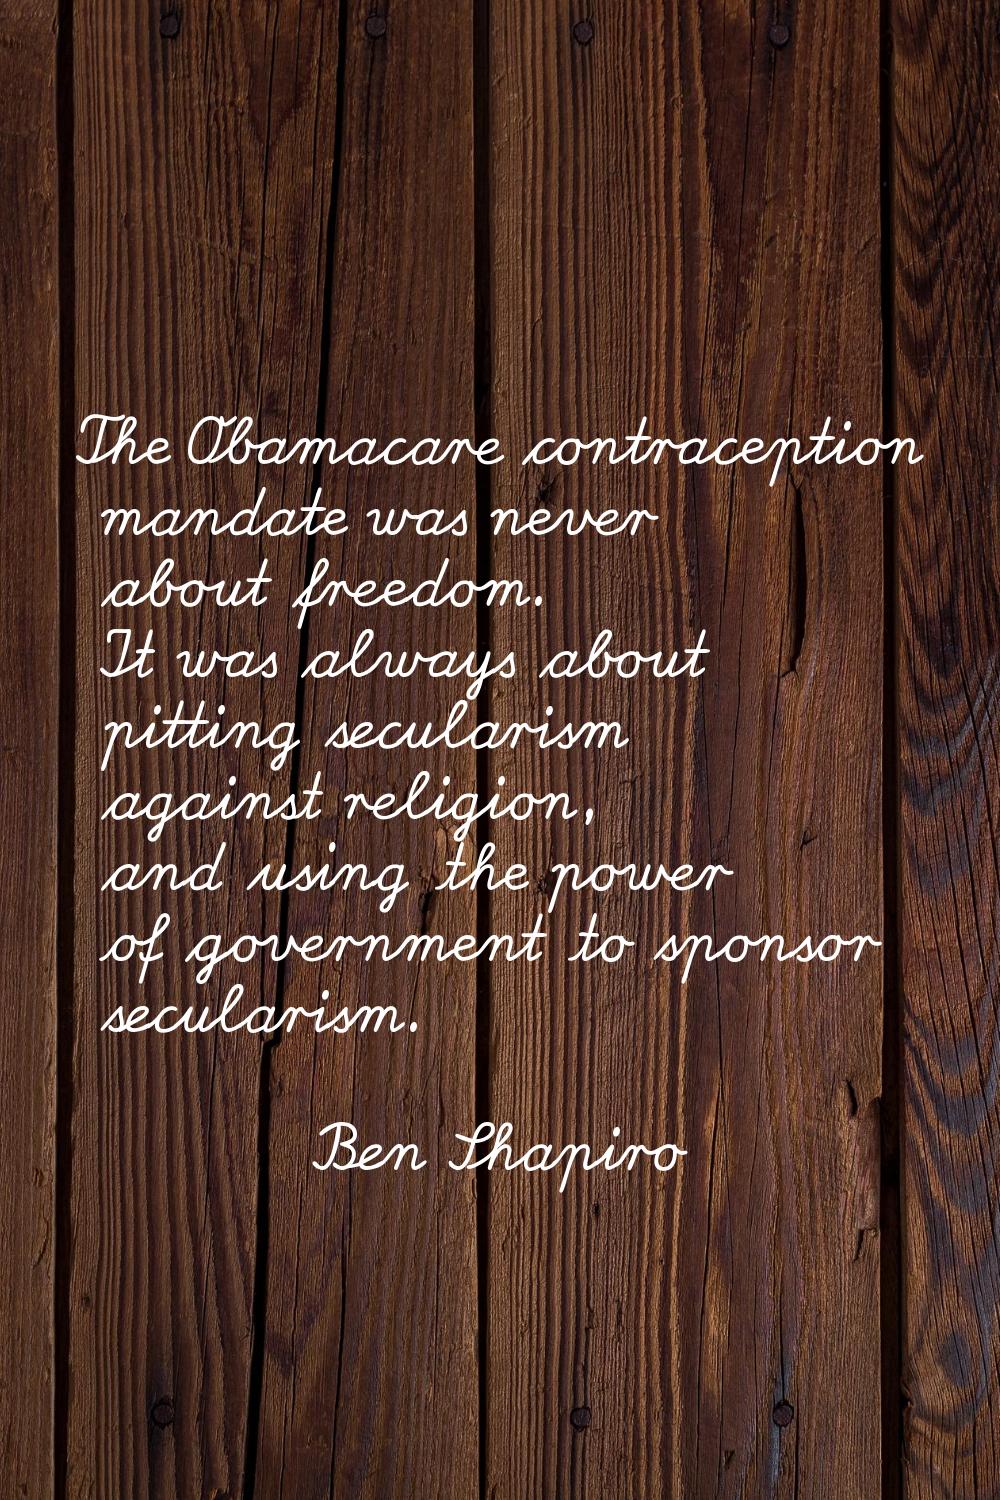 The Obamacare contraception mandate was never about freedom. It was always about pitting secularism